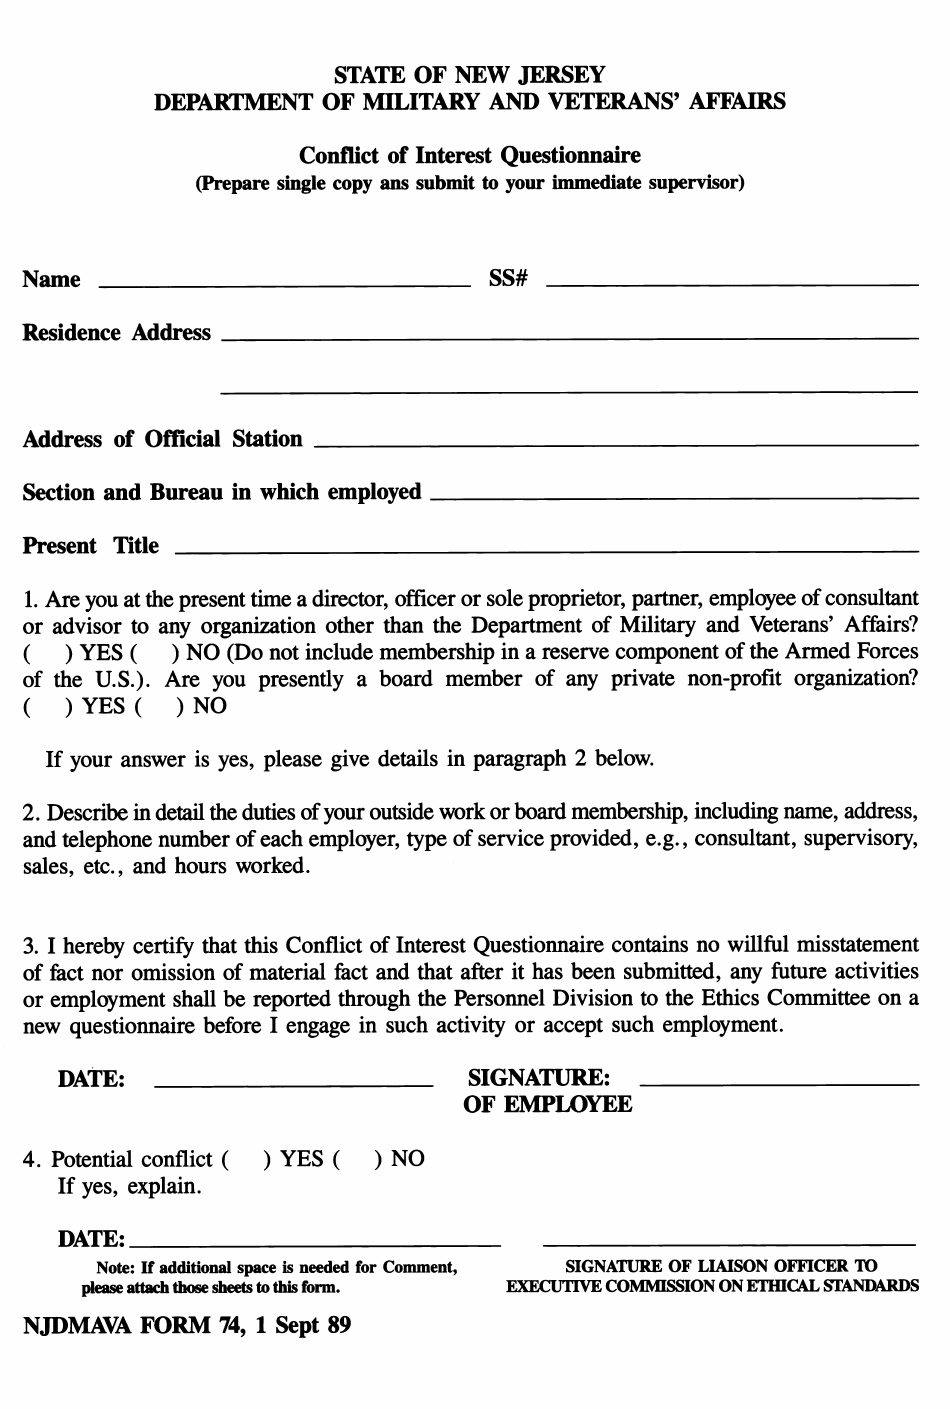 NJDMAVA Form 74 Conflict of Interest Questionnaire - New Jersey, Page 1